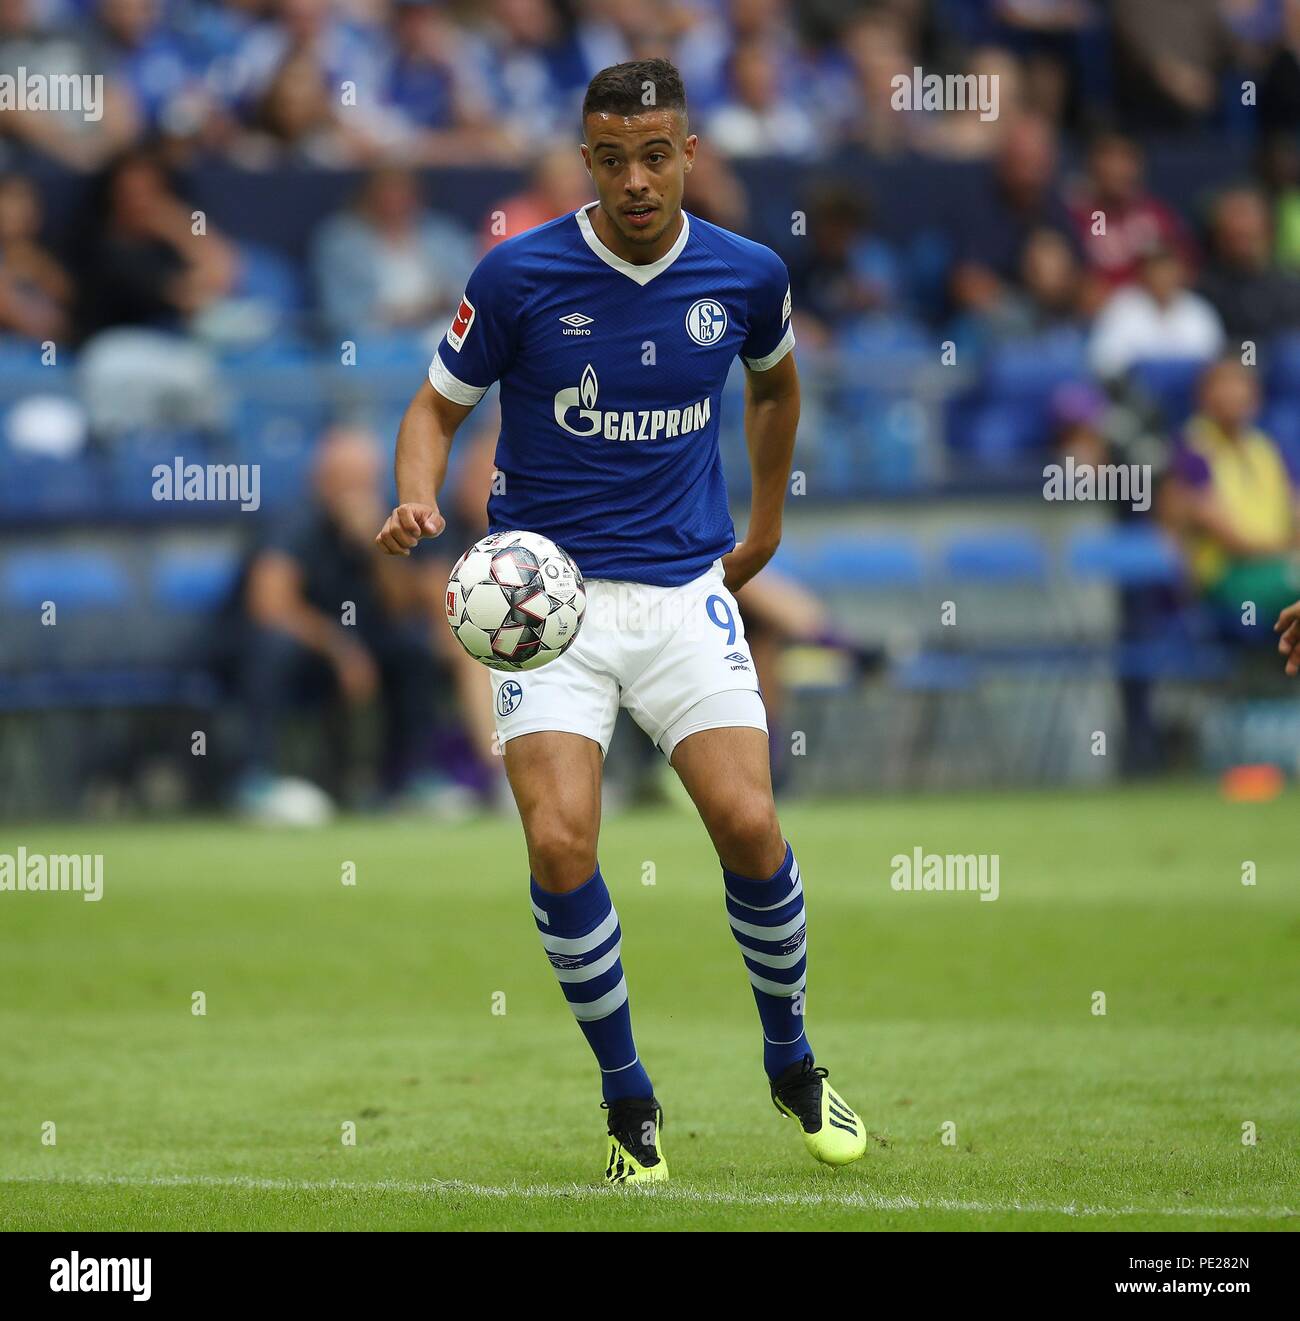 Page 2 - Di Santo Fc Schalke 04 High Resolution Stock Photography and  Images - Alamy